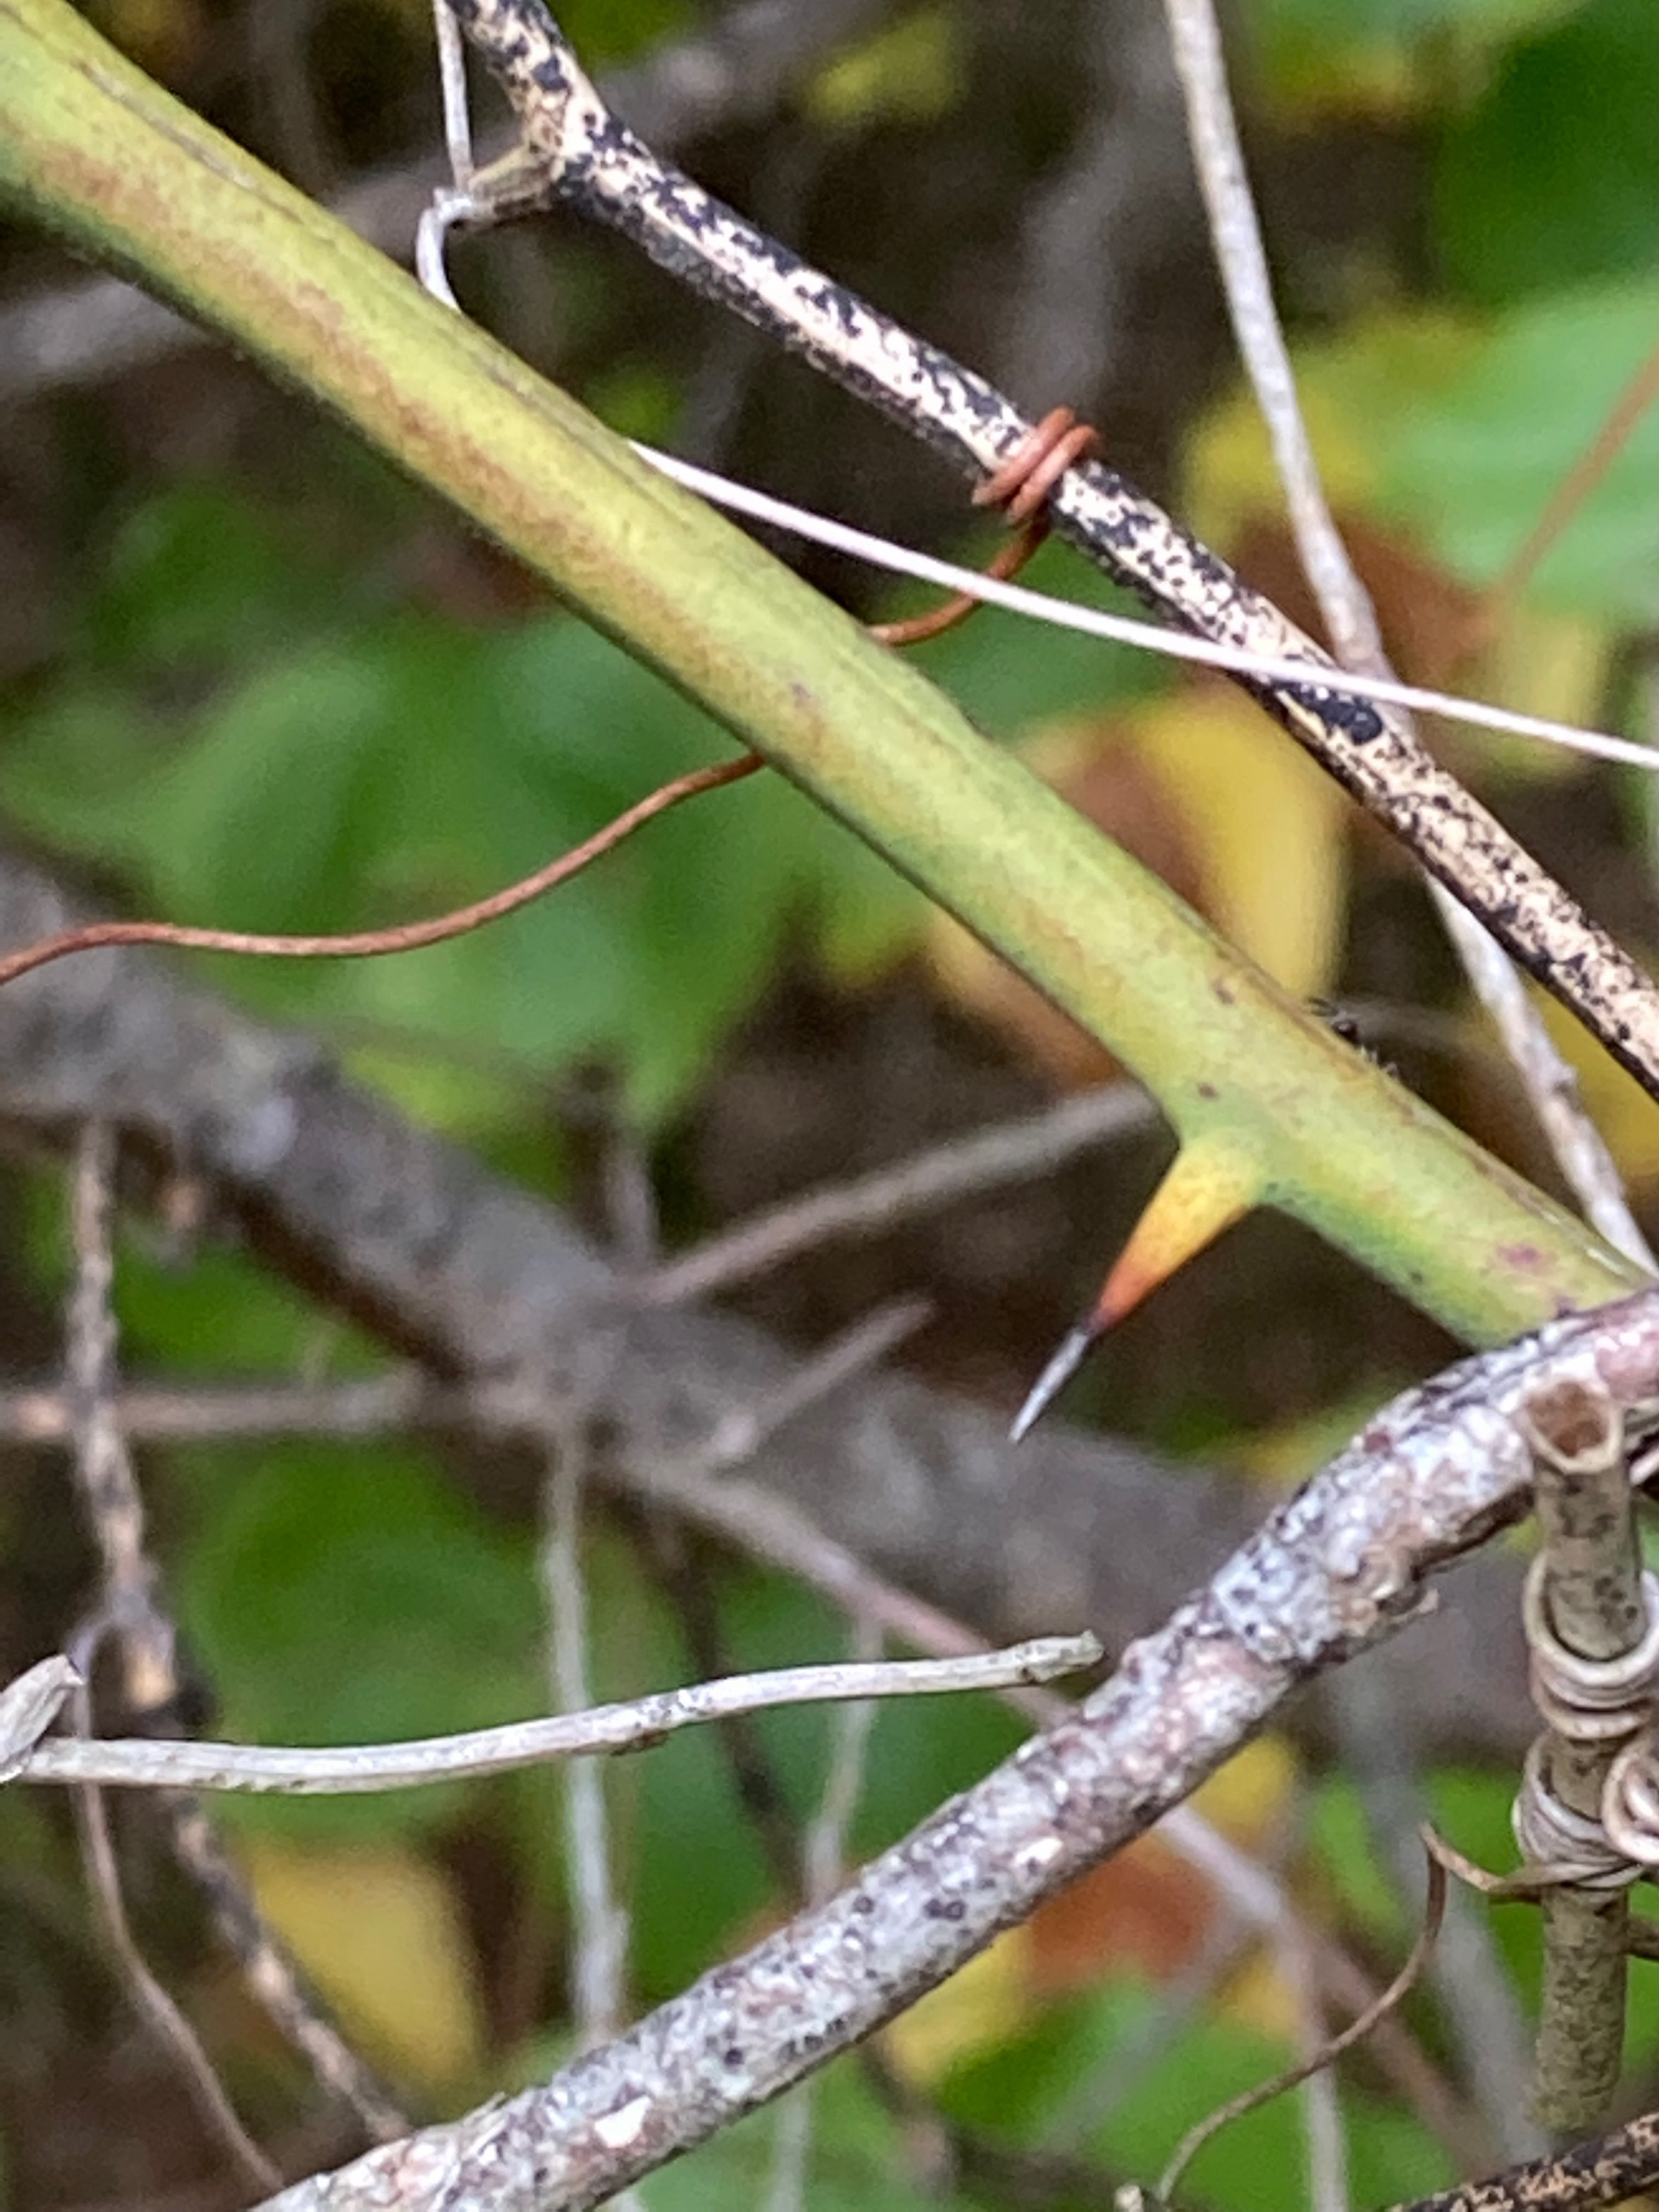 The Scientific Name is Smilax rotundifolia. You will likely hear them called Common Greenbriar, Bullbriar, Horsebriar. This picture shows the Thorns are not uniform in color. The tip lacks any green. of Smilax rotundifolia